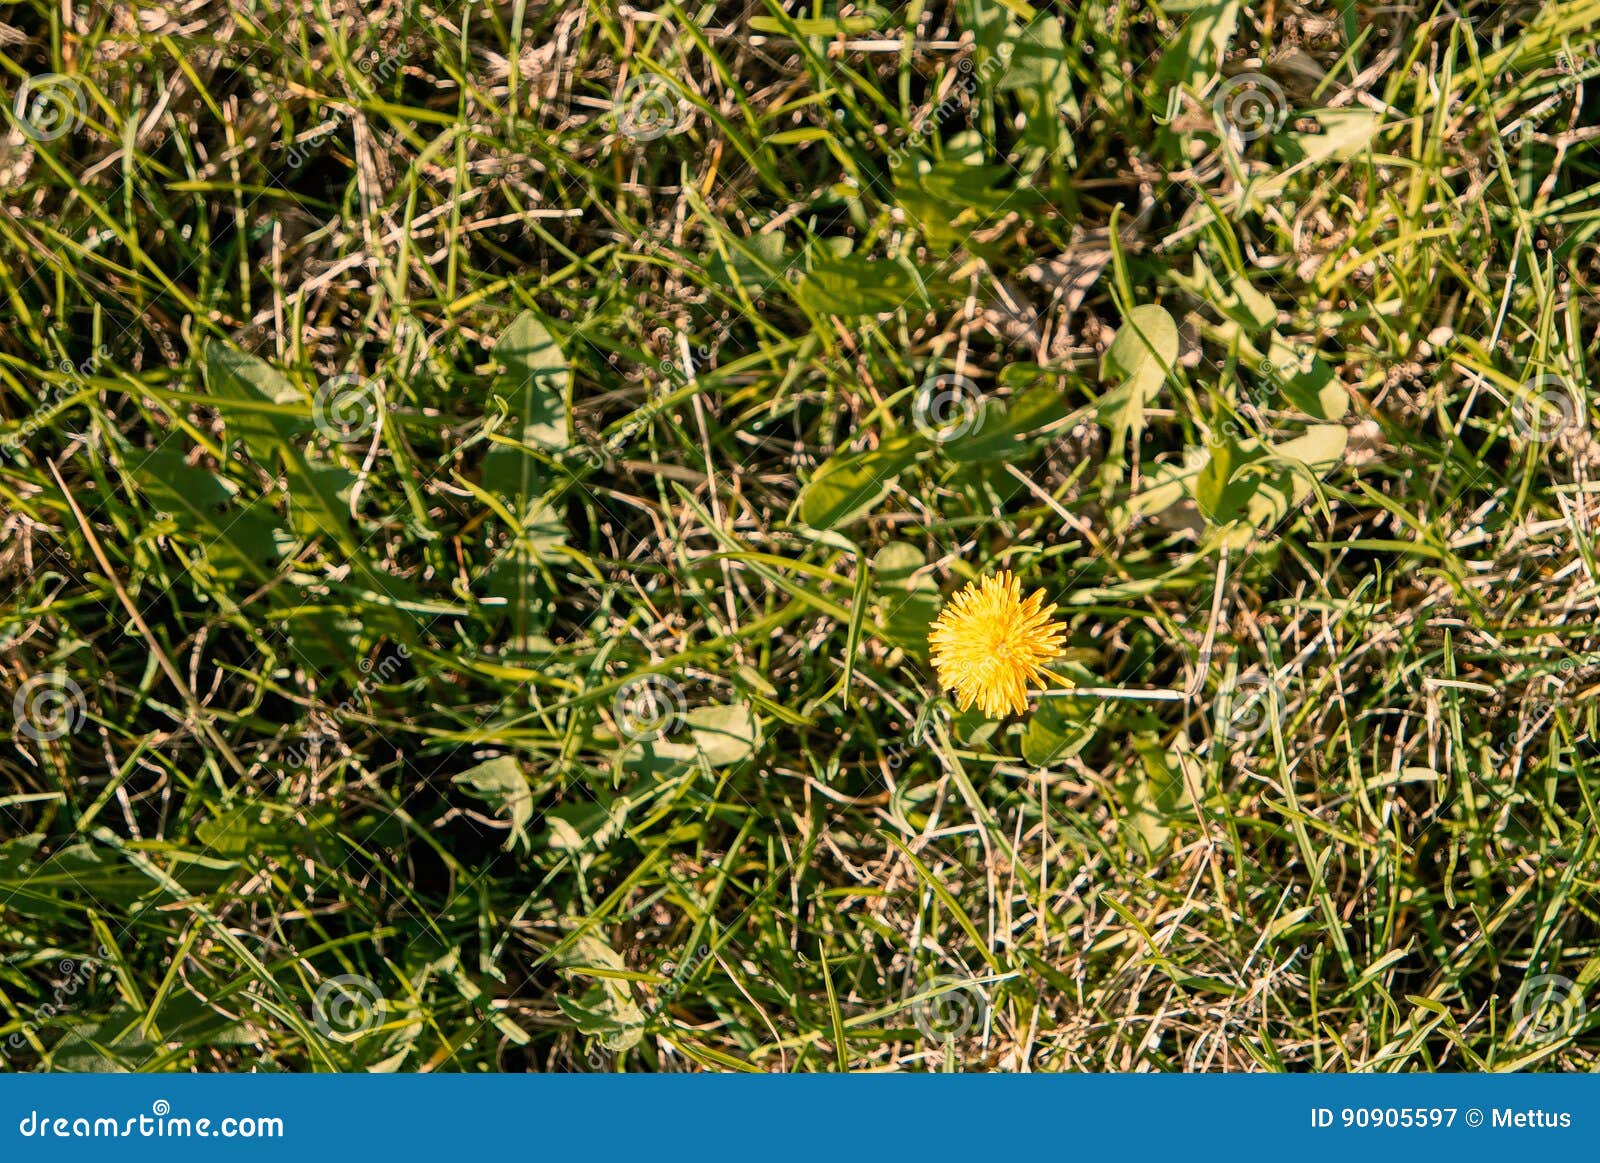 top view of yellow dandelion flower in mesy grass